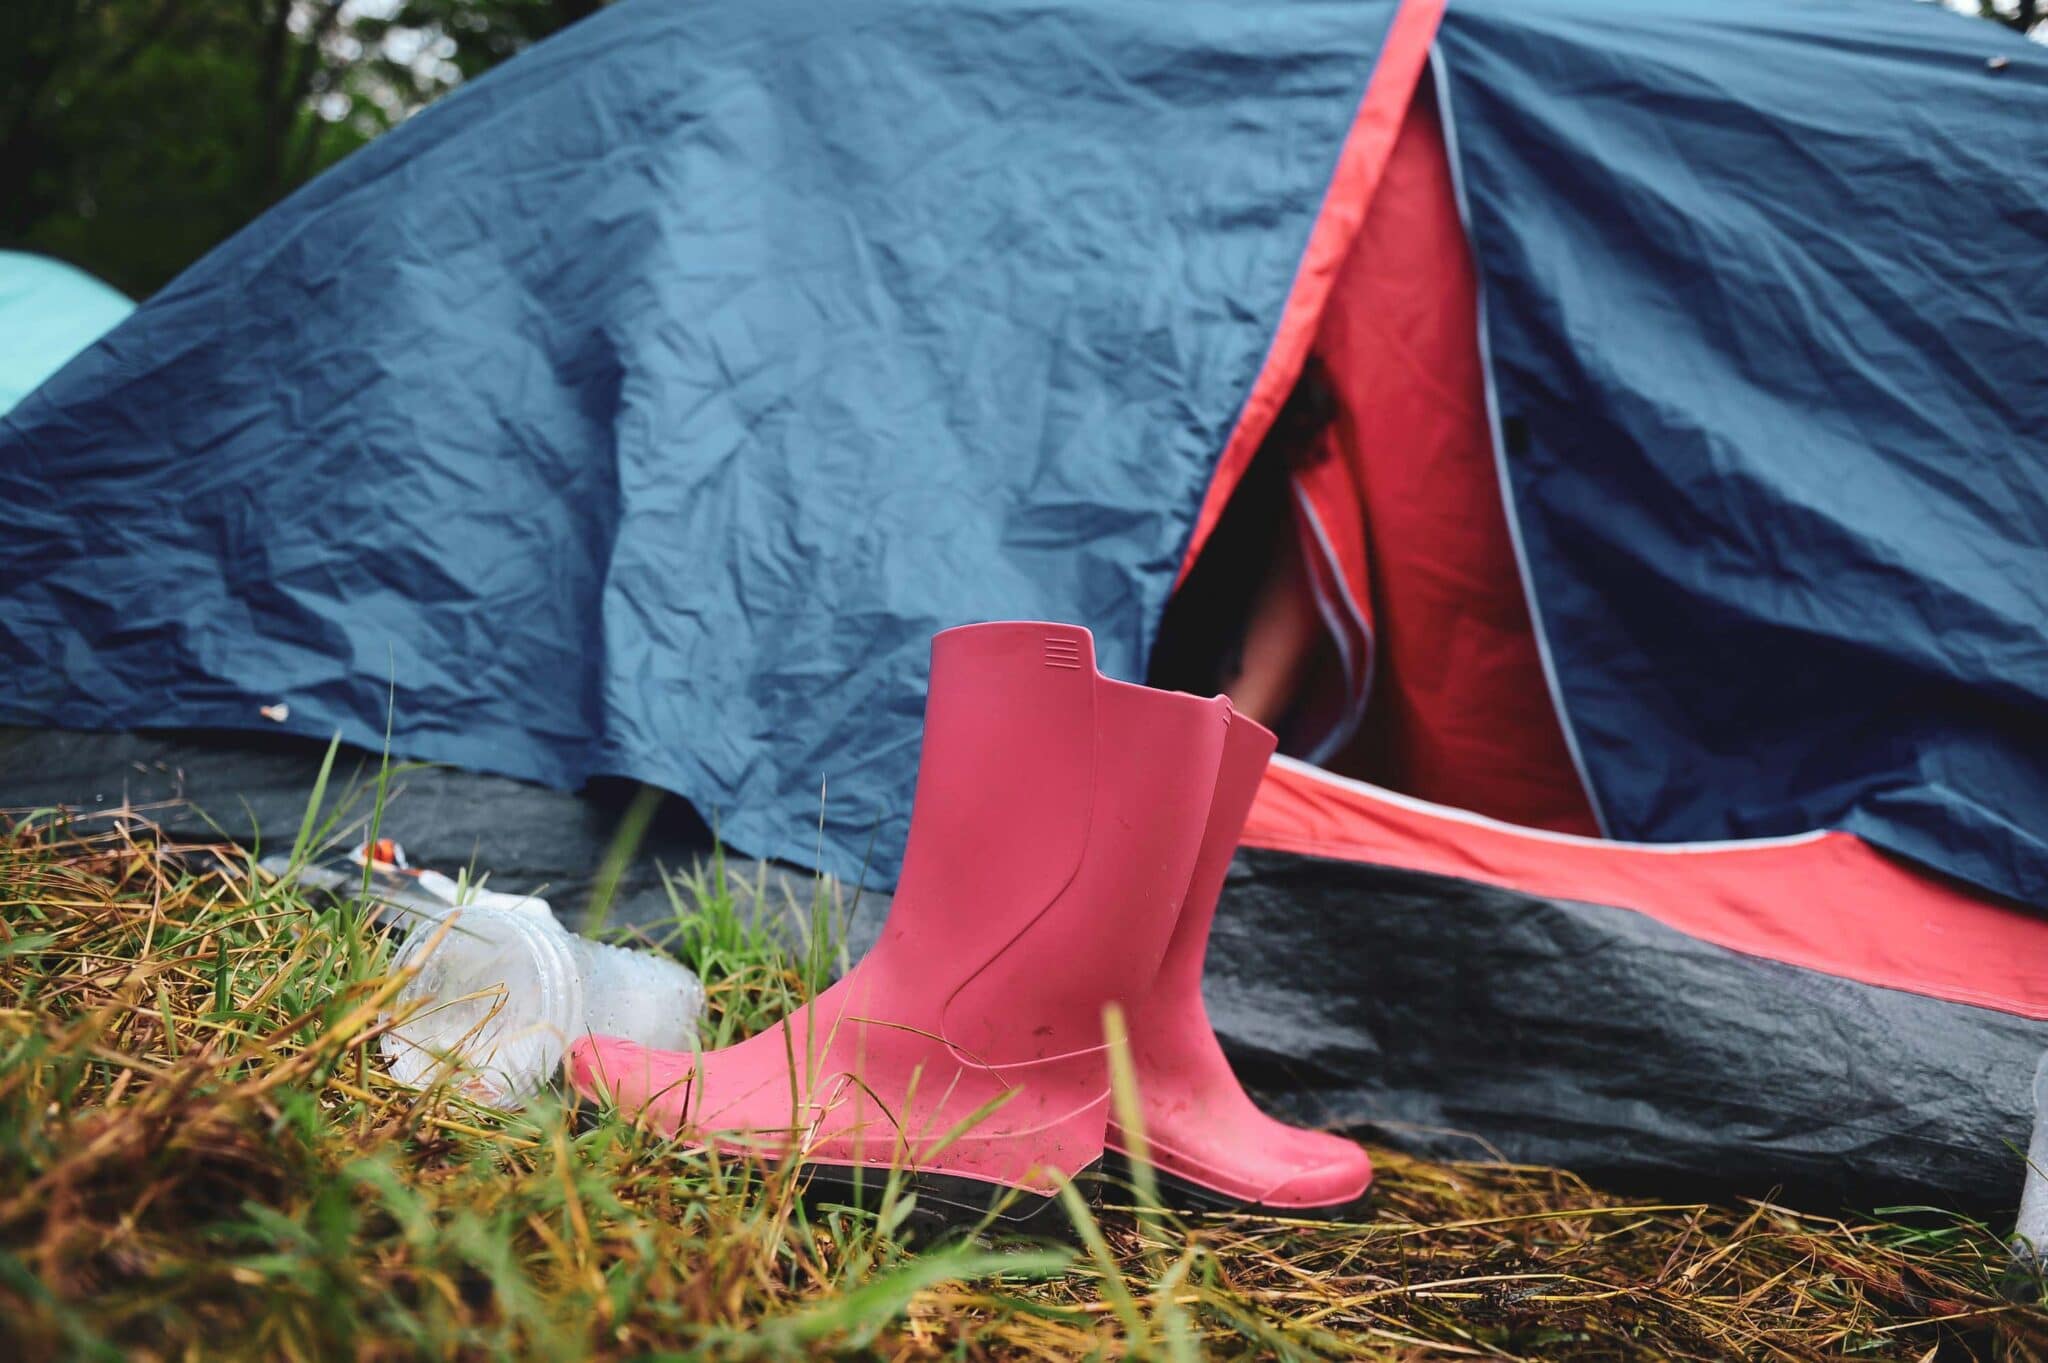 wellies outside a tent